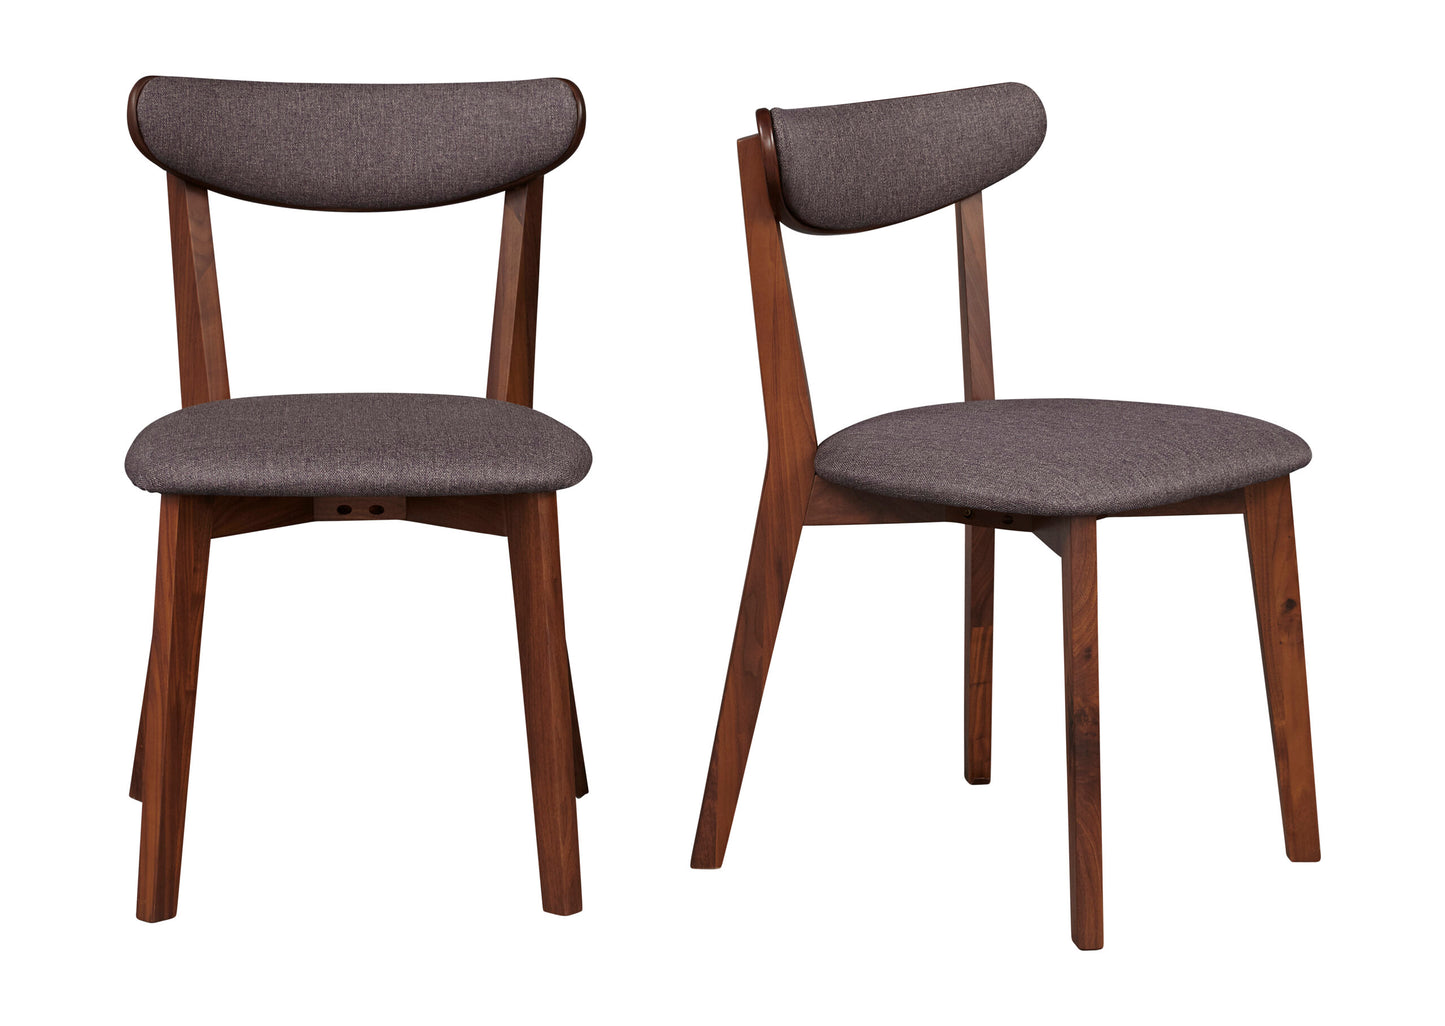 Load image into Gallery viewer, Tahoe American Walnut Dining Chair Dining Chair Unique Furniture     Four Hands, Mid Century Modern Furniture, Old Bones Furniture Company, Old Bones Co, Modern Mid Century, Designer Furniture, https://www.oldbonesco.com/
